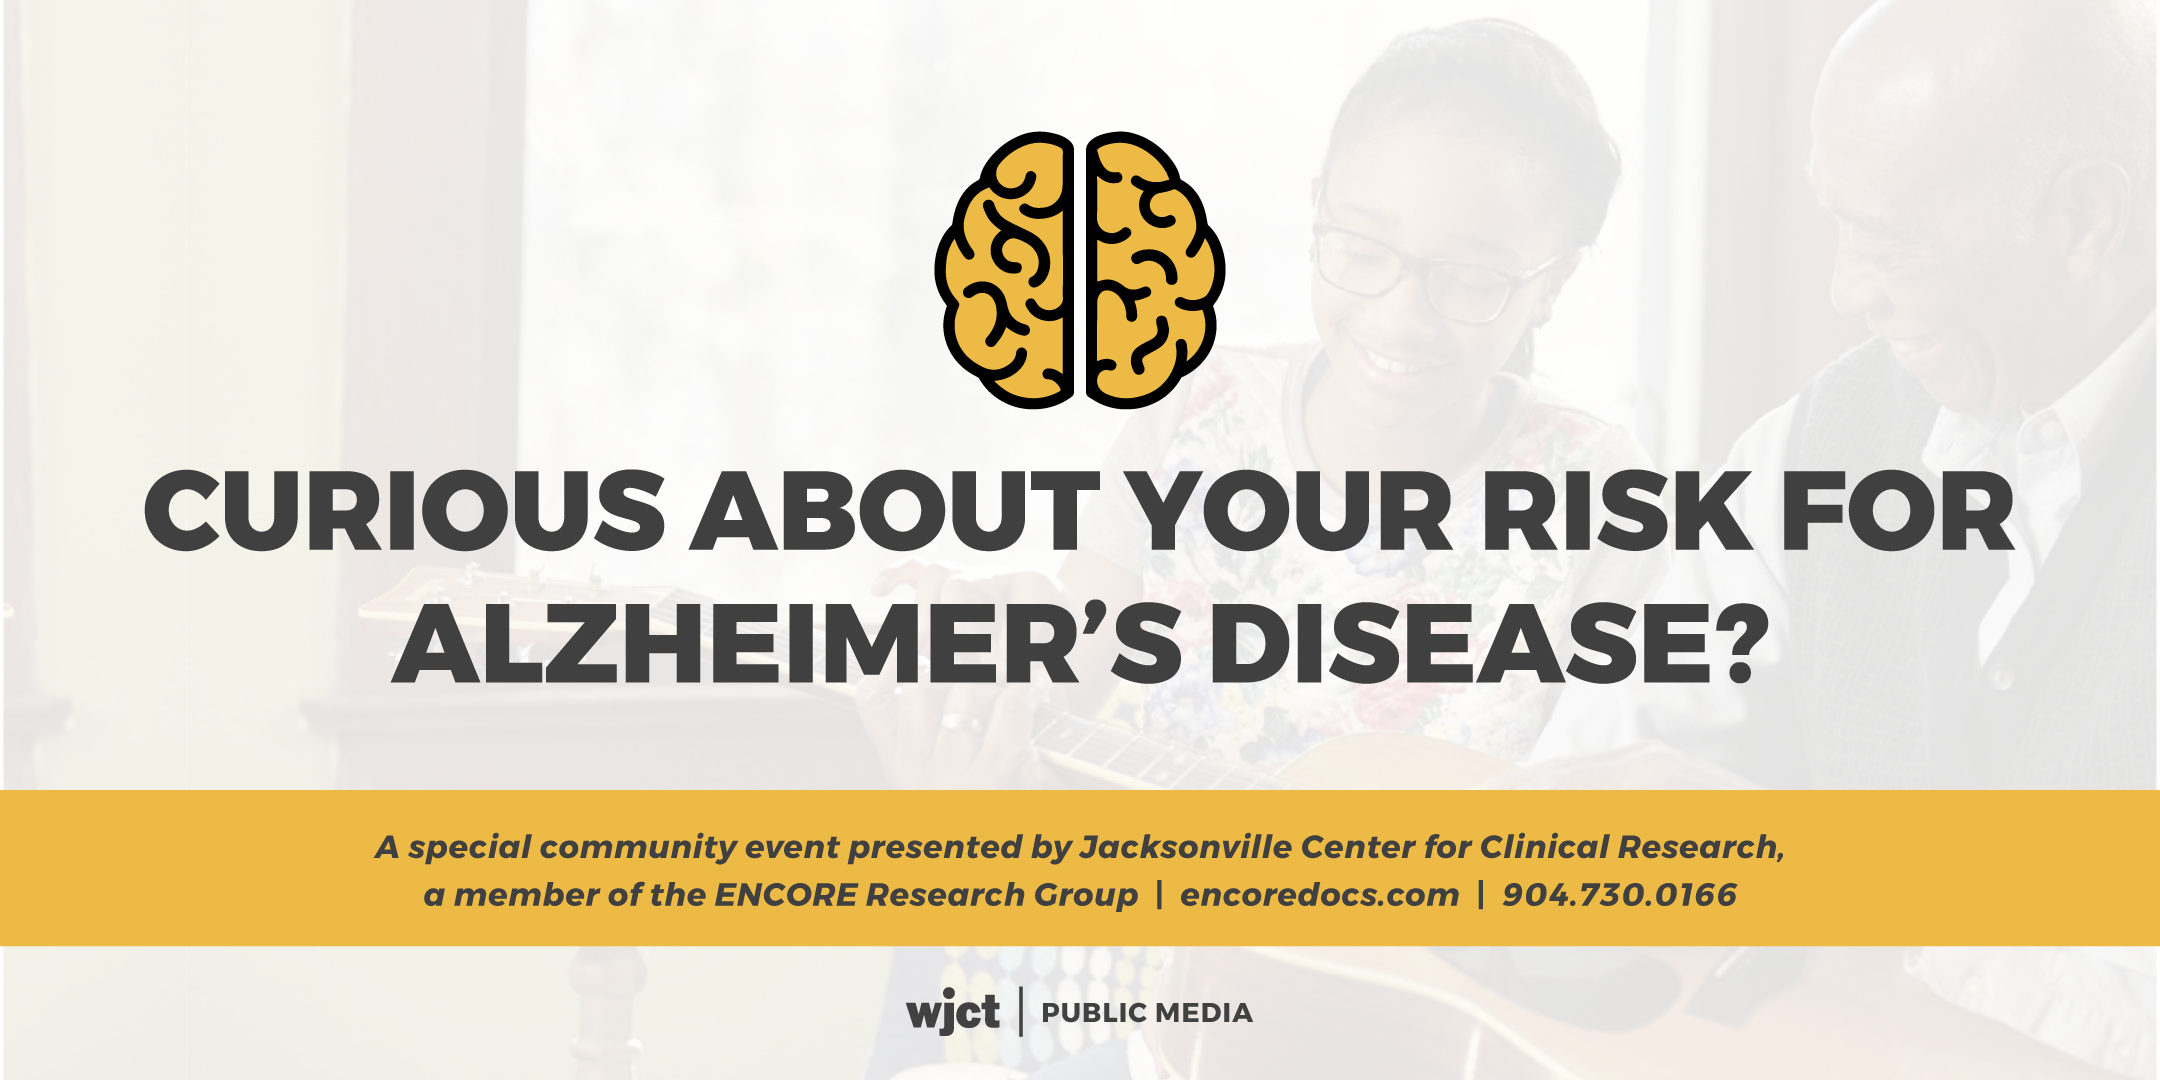 Curious About Your Risk For Alzheimer's Disease?